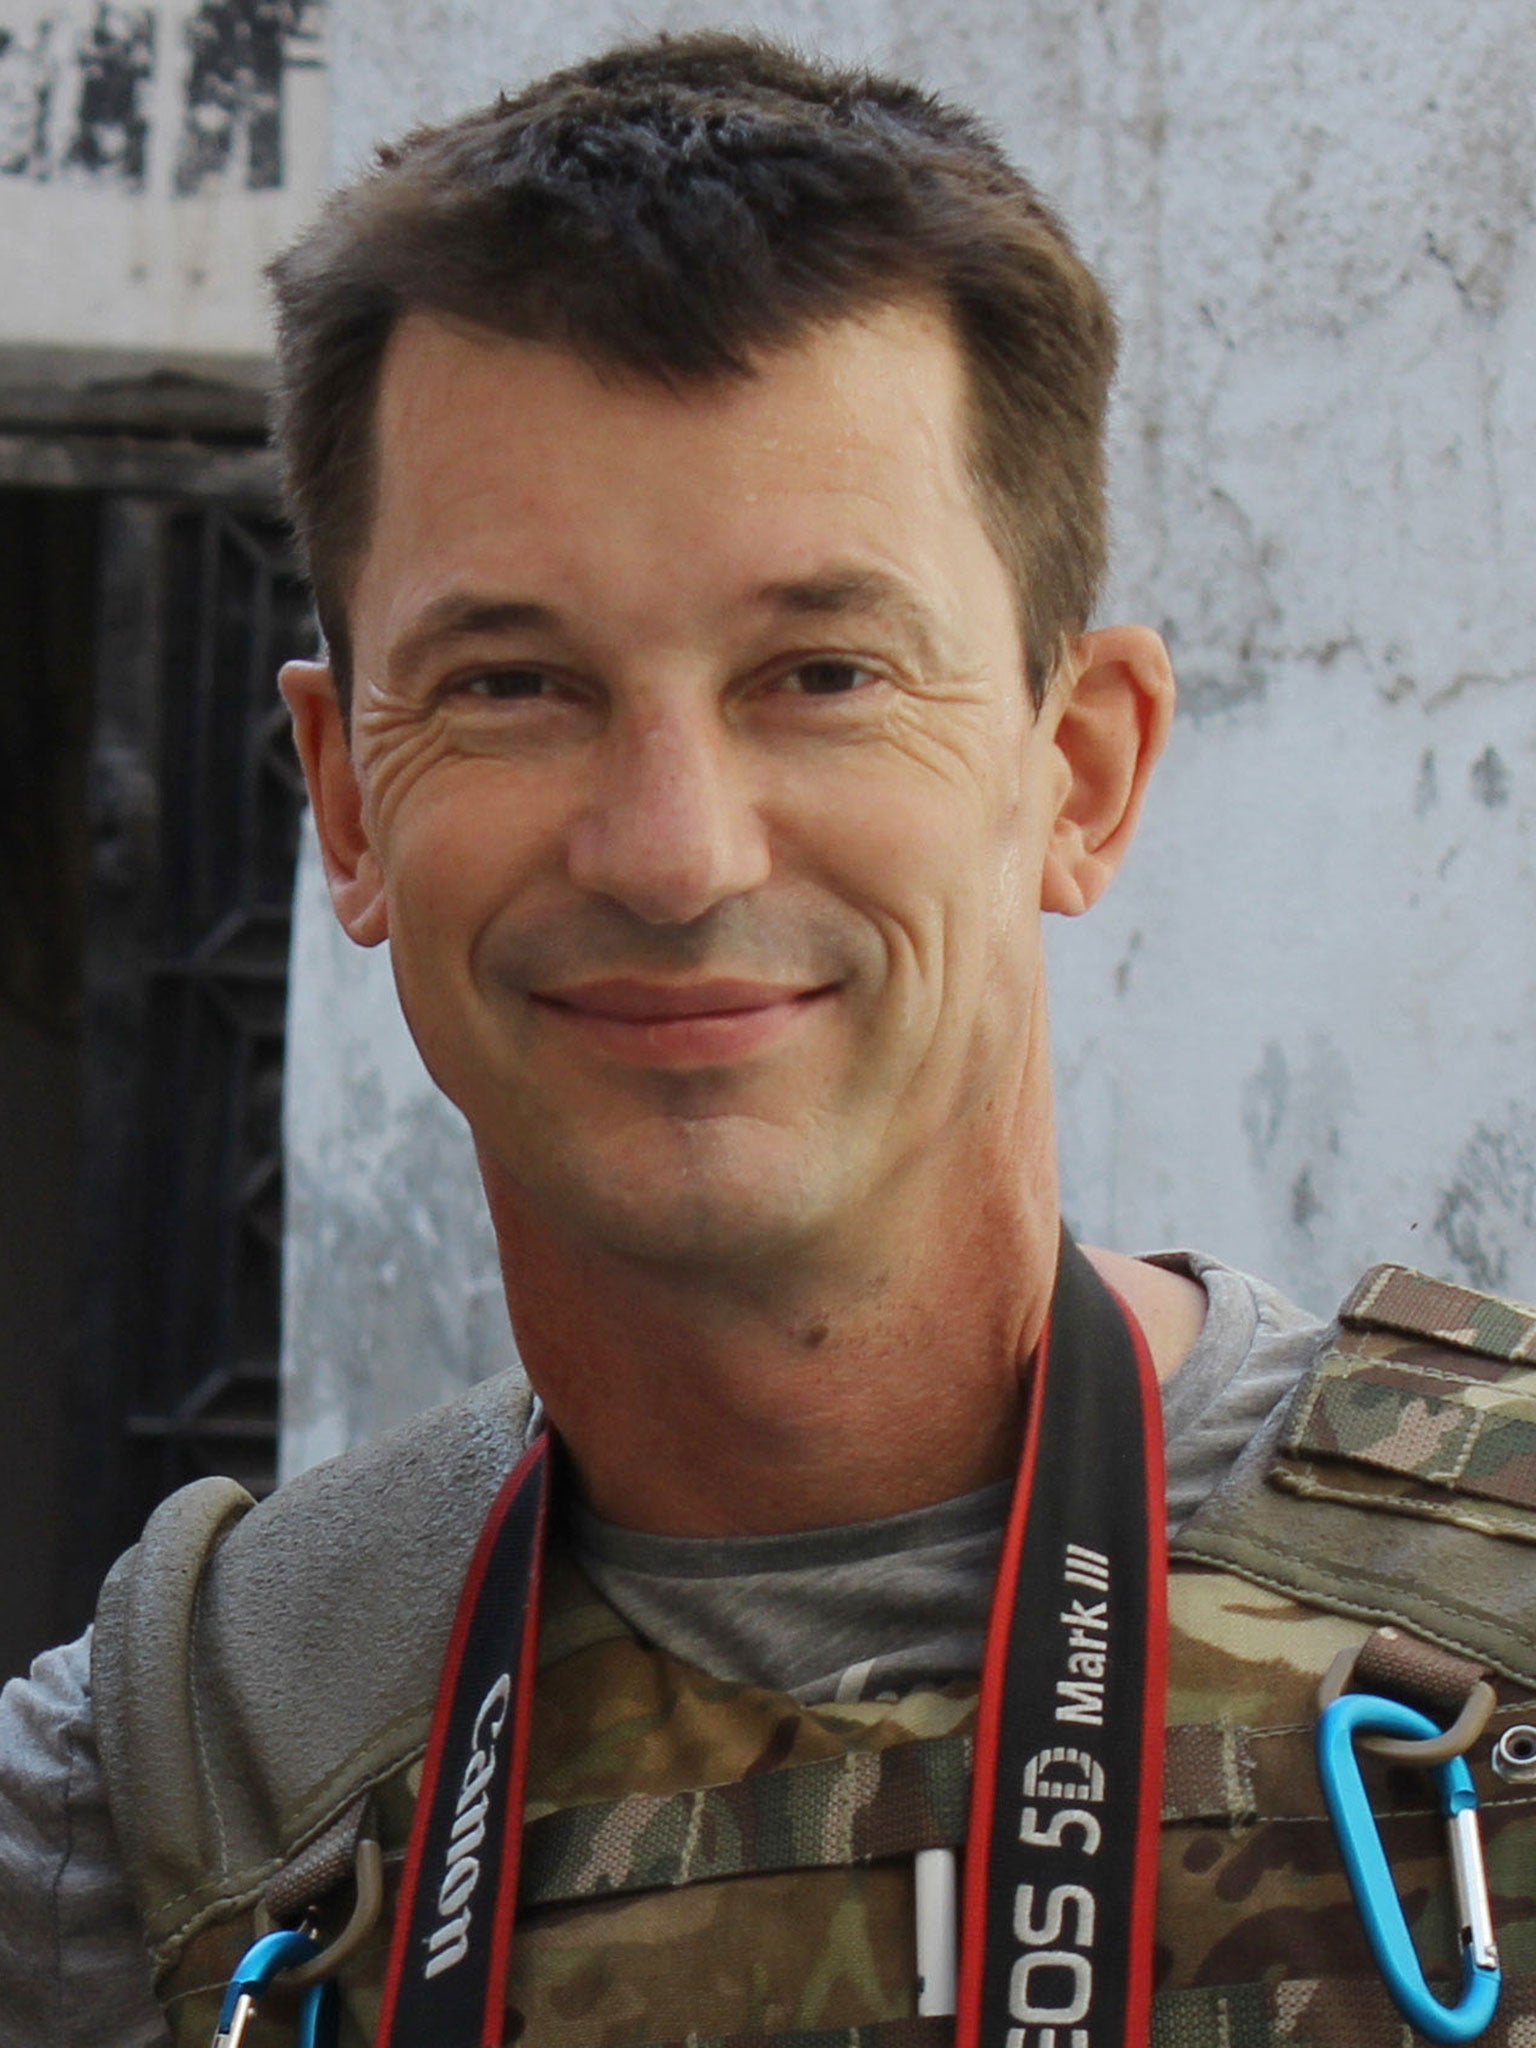 Photojournalist John Cantlie pictured in Aleppo, Syria, in 2012 AP